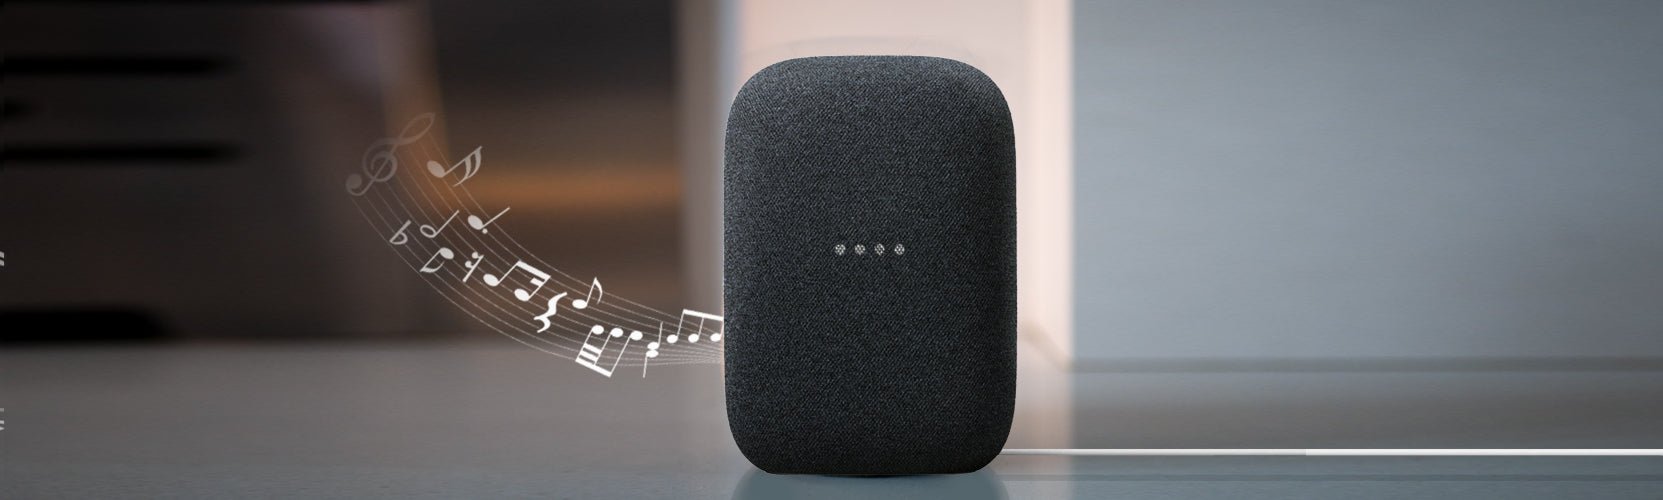 How to Use Google Home as a Speaker